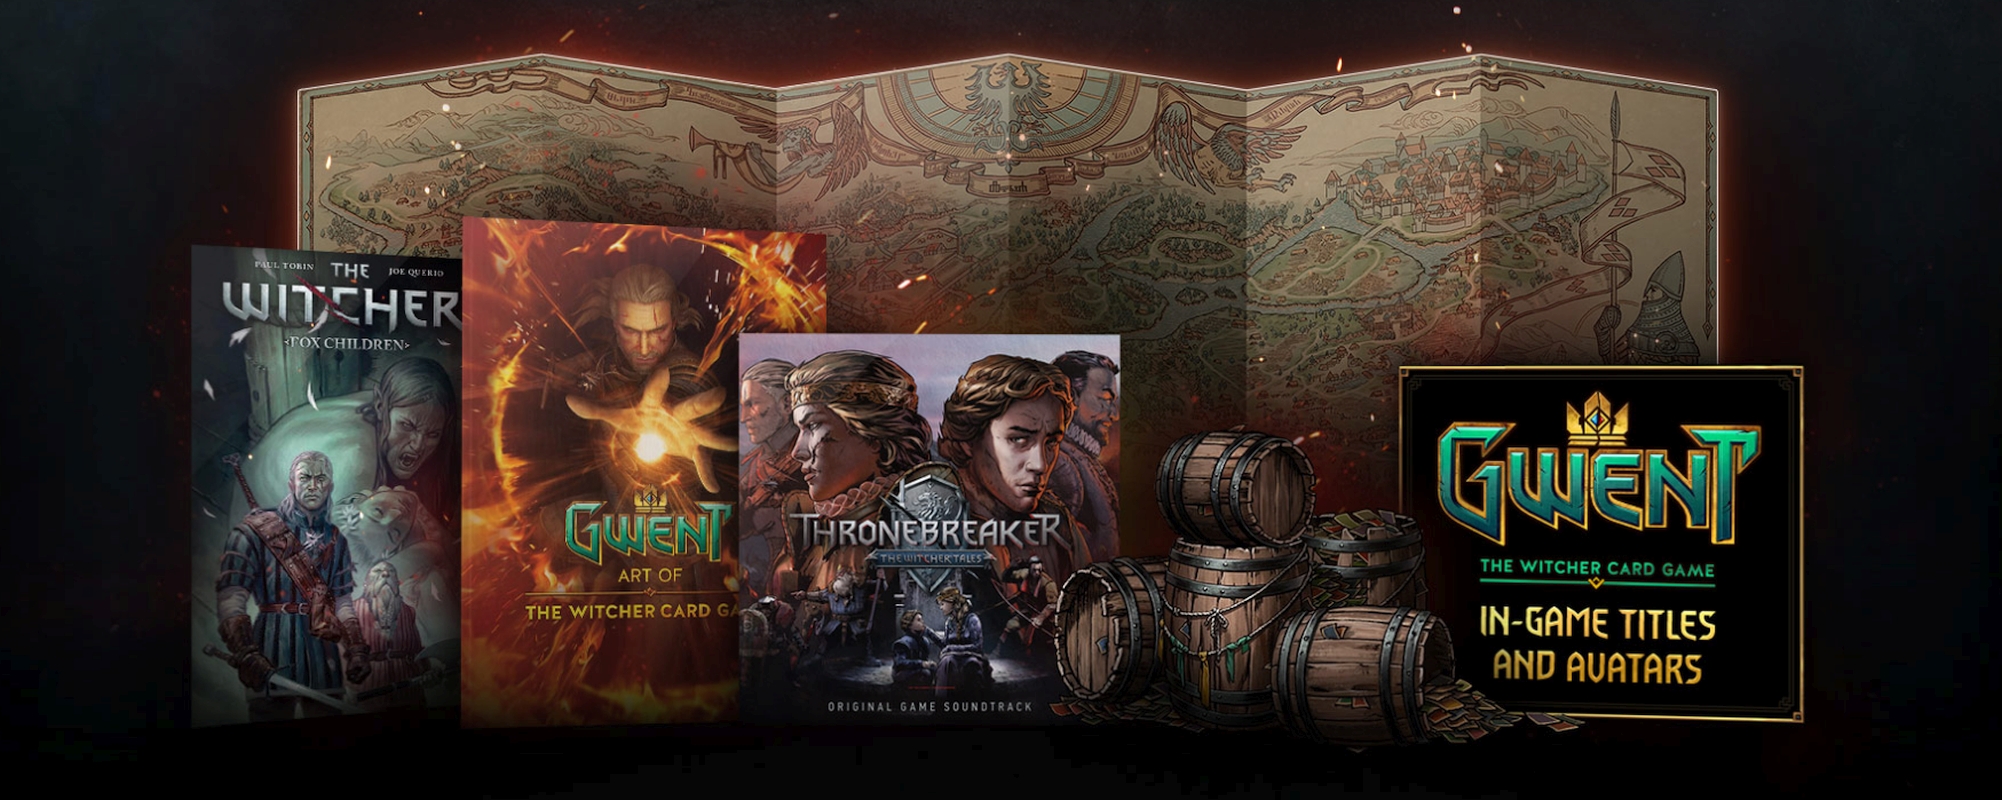 Thronebreaker: The Witcher Tales Has Extra Downloadable Bonuses From CD Projekt Red’s Website